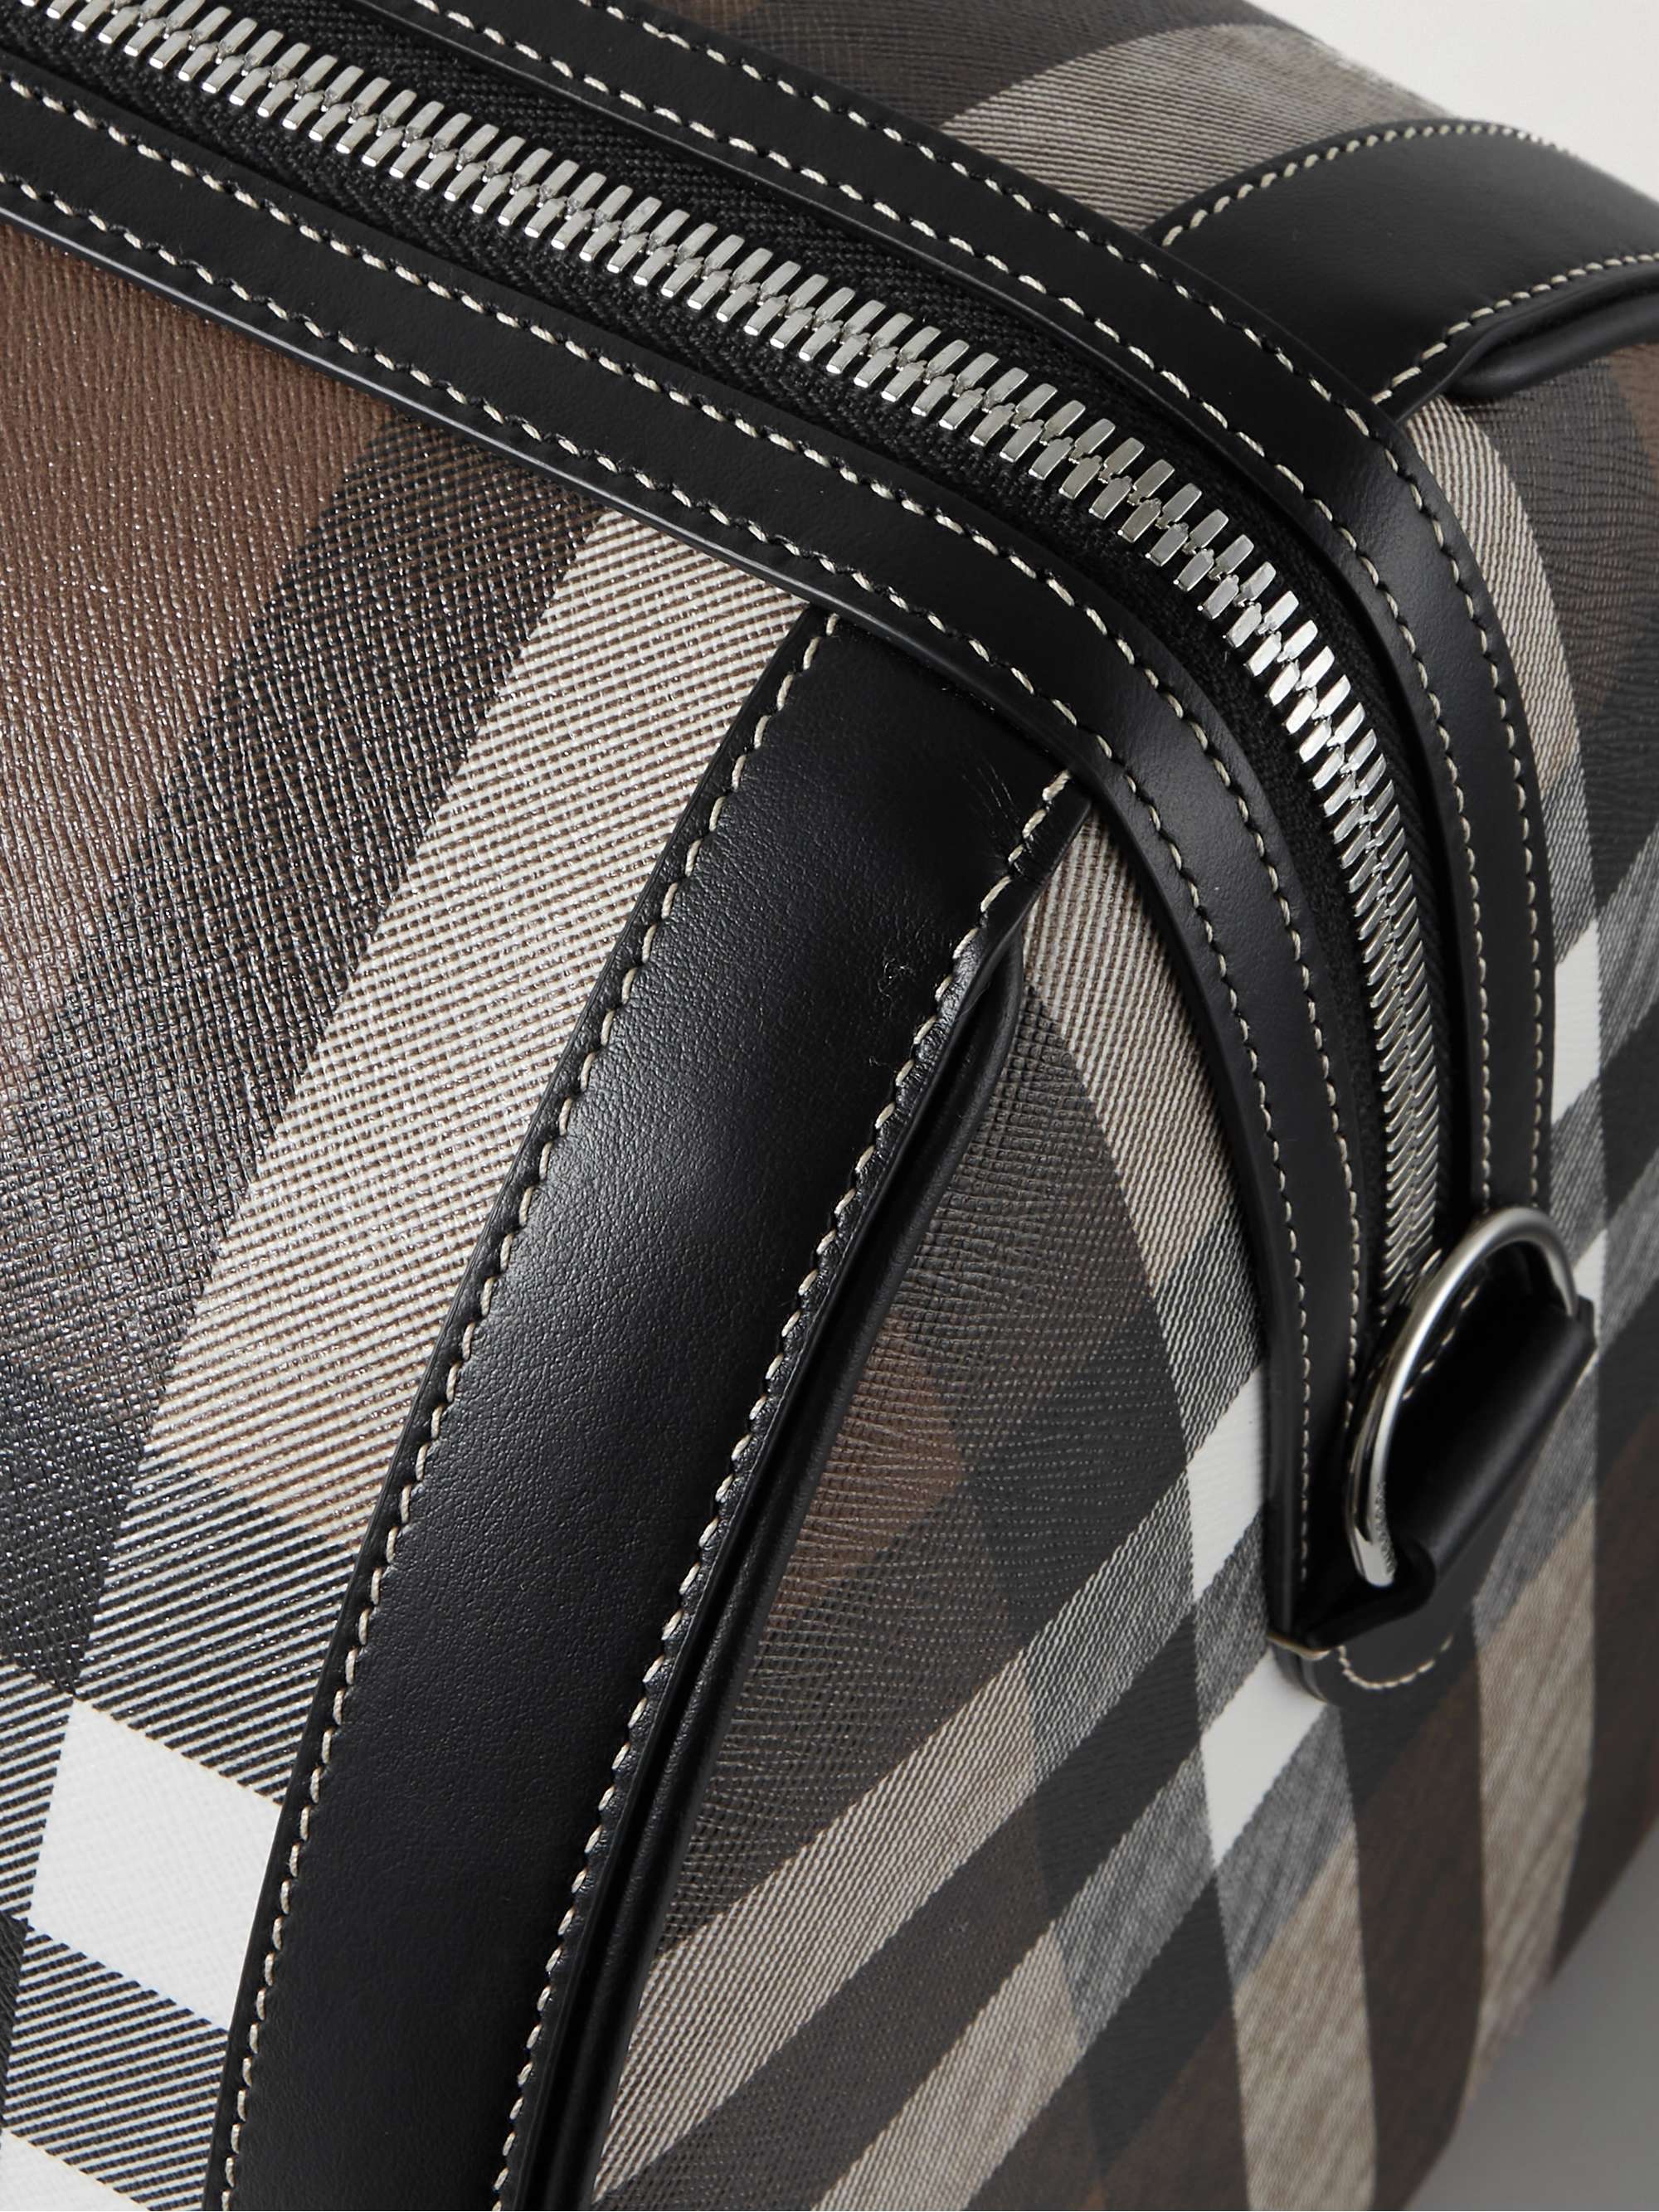 BURBERRY Leather-Trimmed Checked E-Canvas Weekend Bag